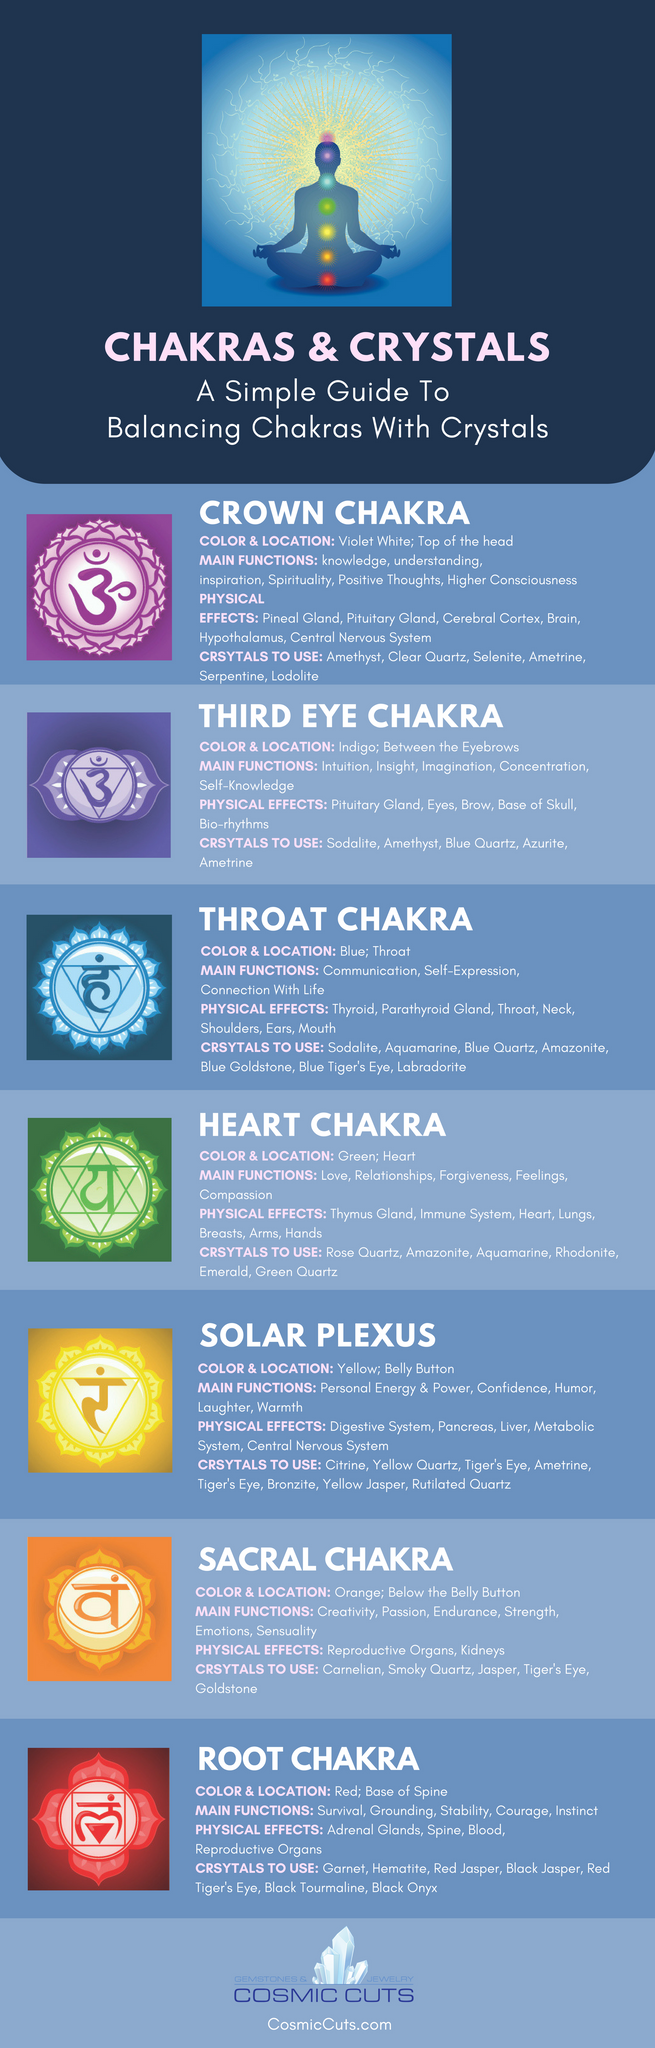 Crystals and Chakras Infographic